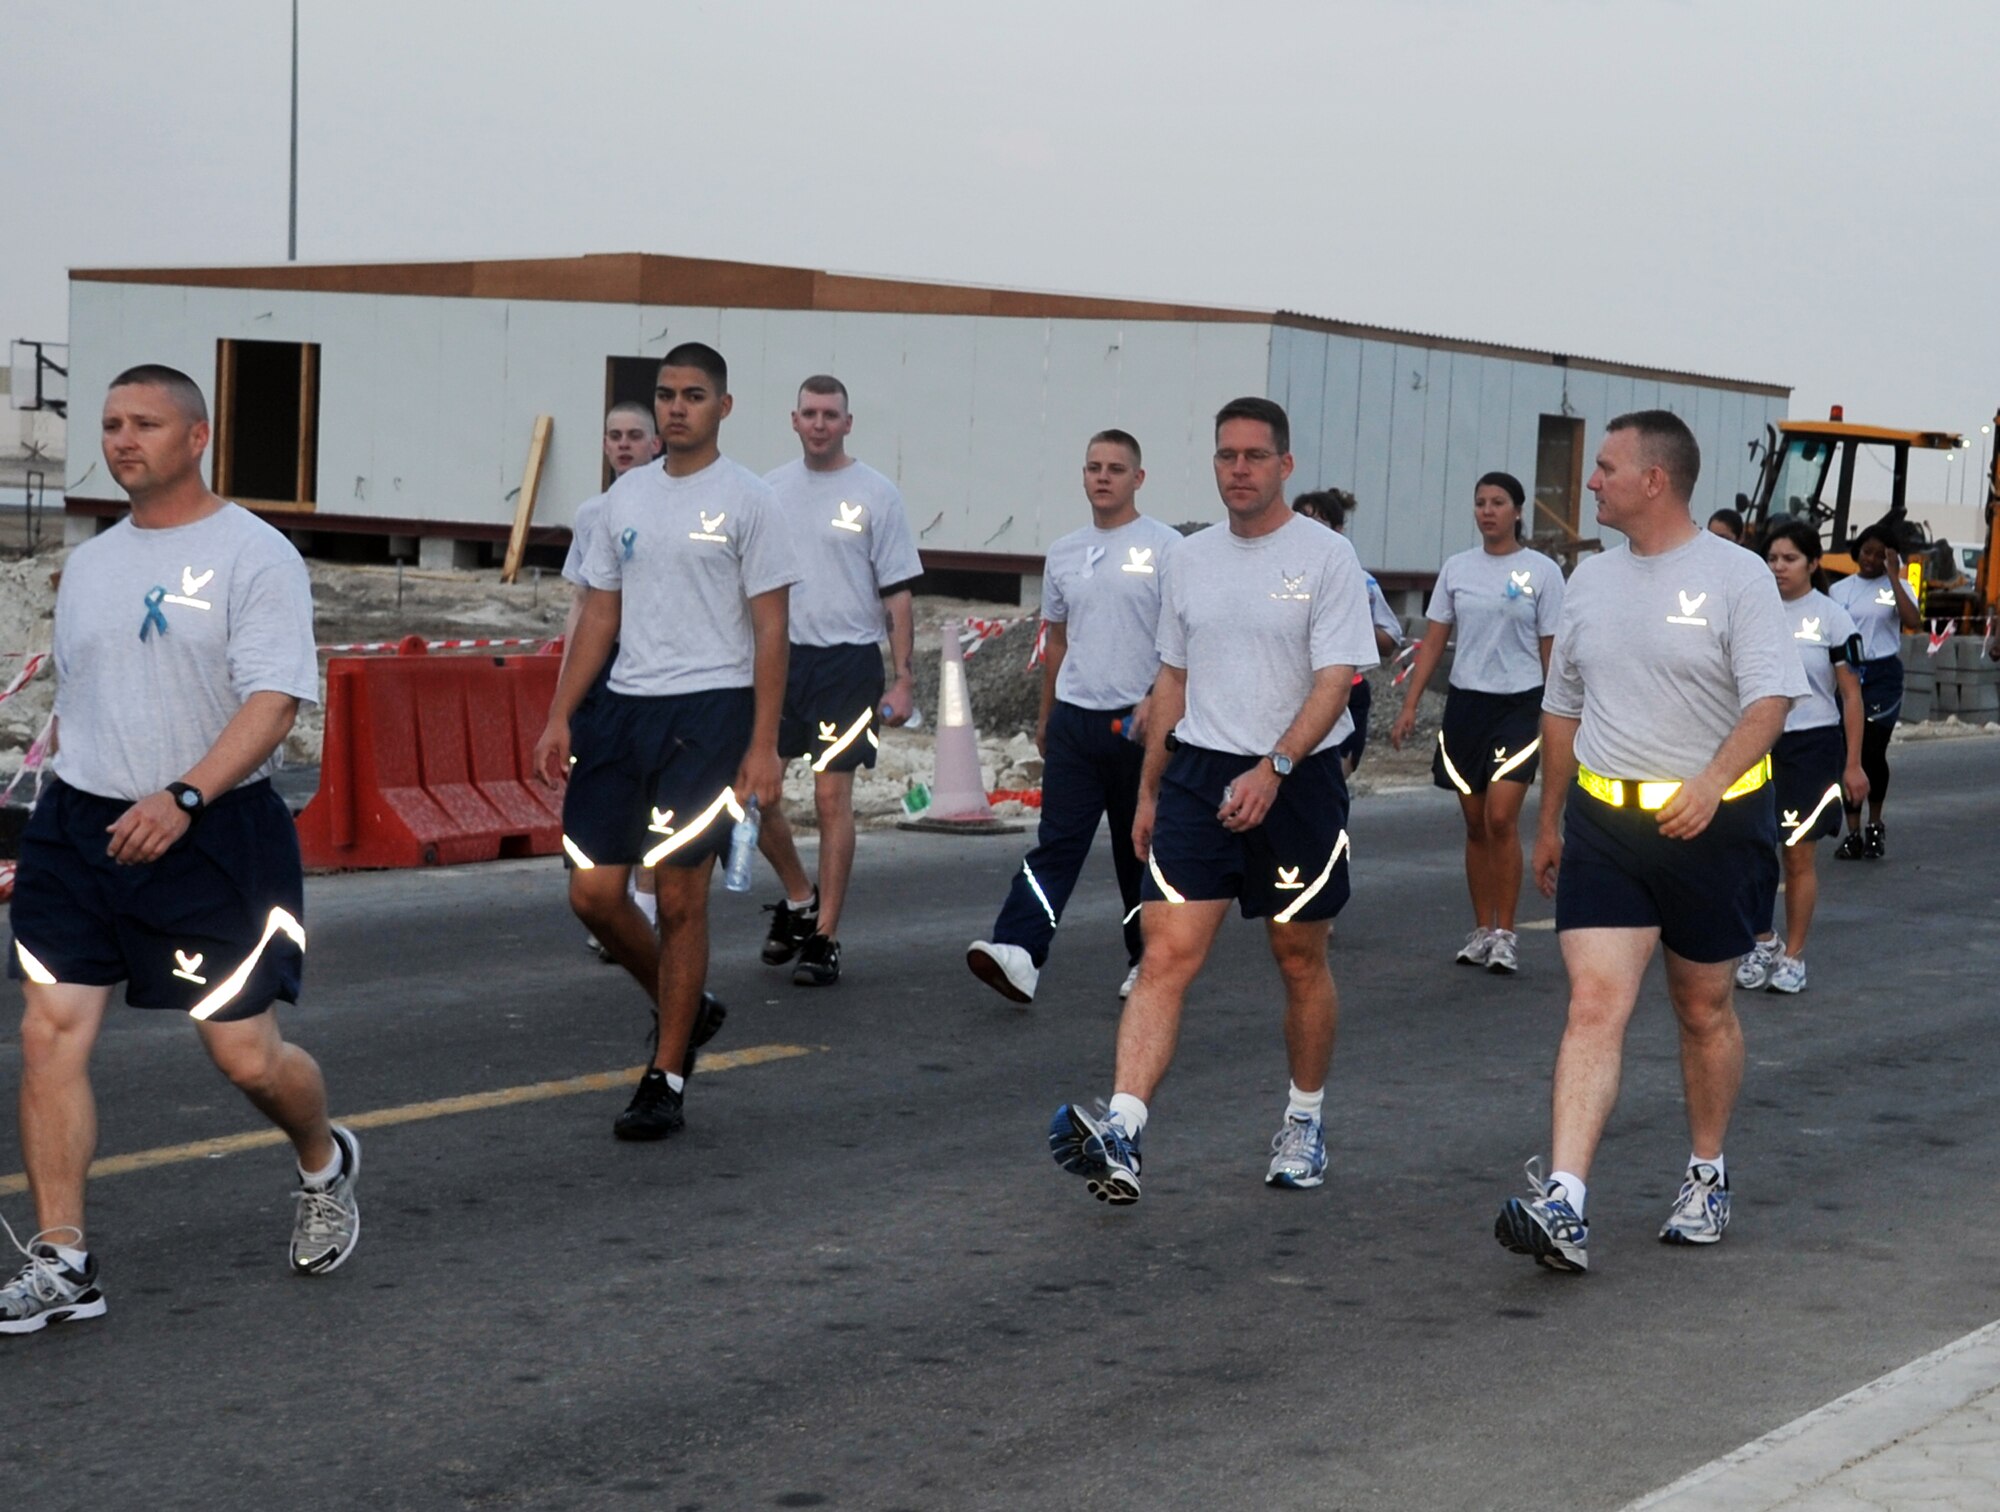 Airmen from the 380th Air Expeditionary Wing participate in the "Walk A Mile In Their Shoes" event by the 380th Air Expeditionary Wing at a non-disclosed base in Southwest Asia on April, 19, 2010, in observance of Sexual Assault Awareness Month. Throughout a one-mile walk, signs with information on sexual assault were placed while walk participants read them and walked in silence. The event was organized by Capt. Richard Laca -- the 380th AEW sexual assault response coordinator. (U.S. Air Force Photo/Master Sgt. Scott T. Sturkol/Released)